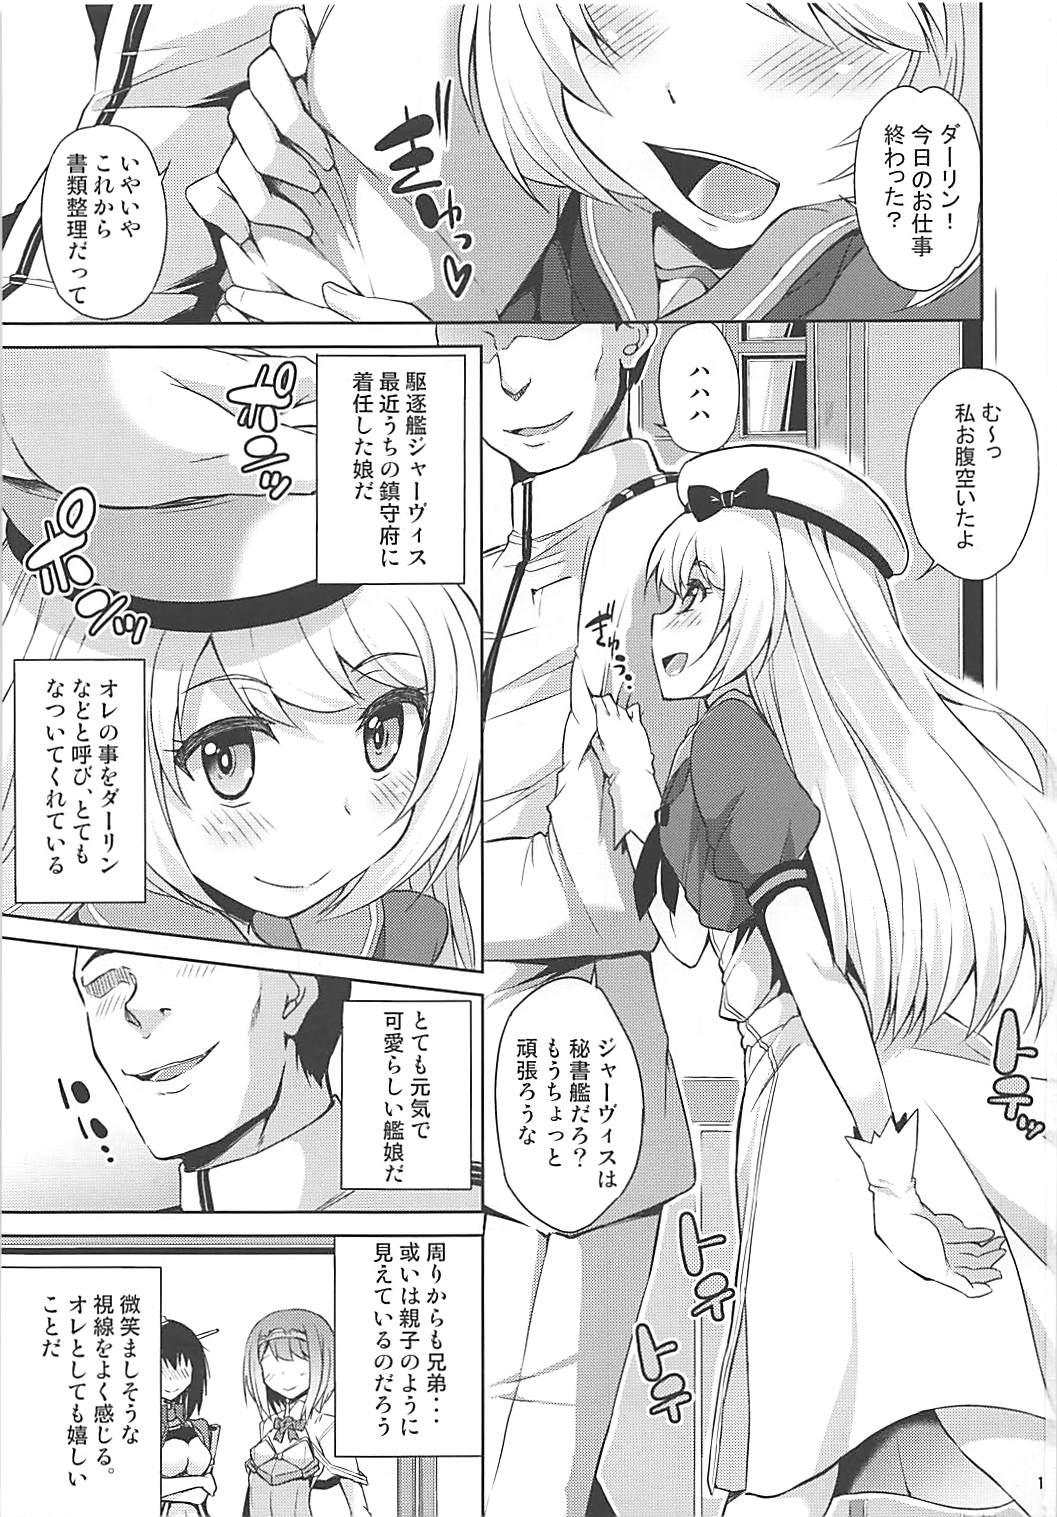 Full Movie Service Manten Jervis-chan - Kantai collection Tit - Page 2